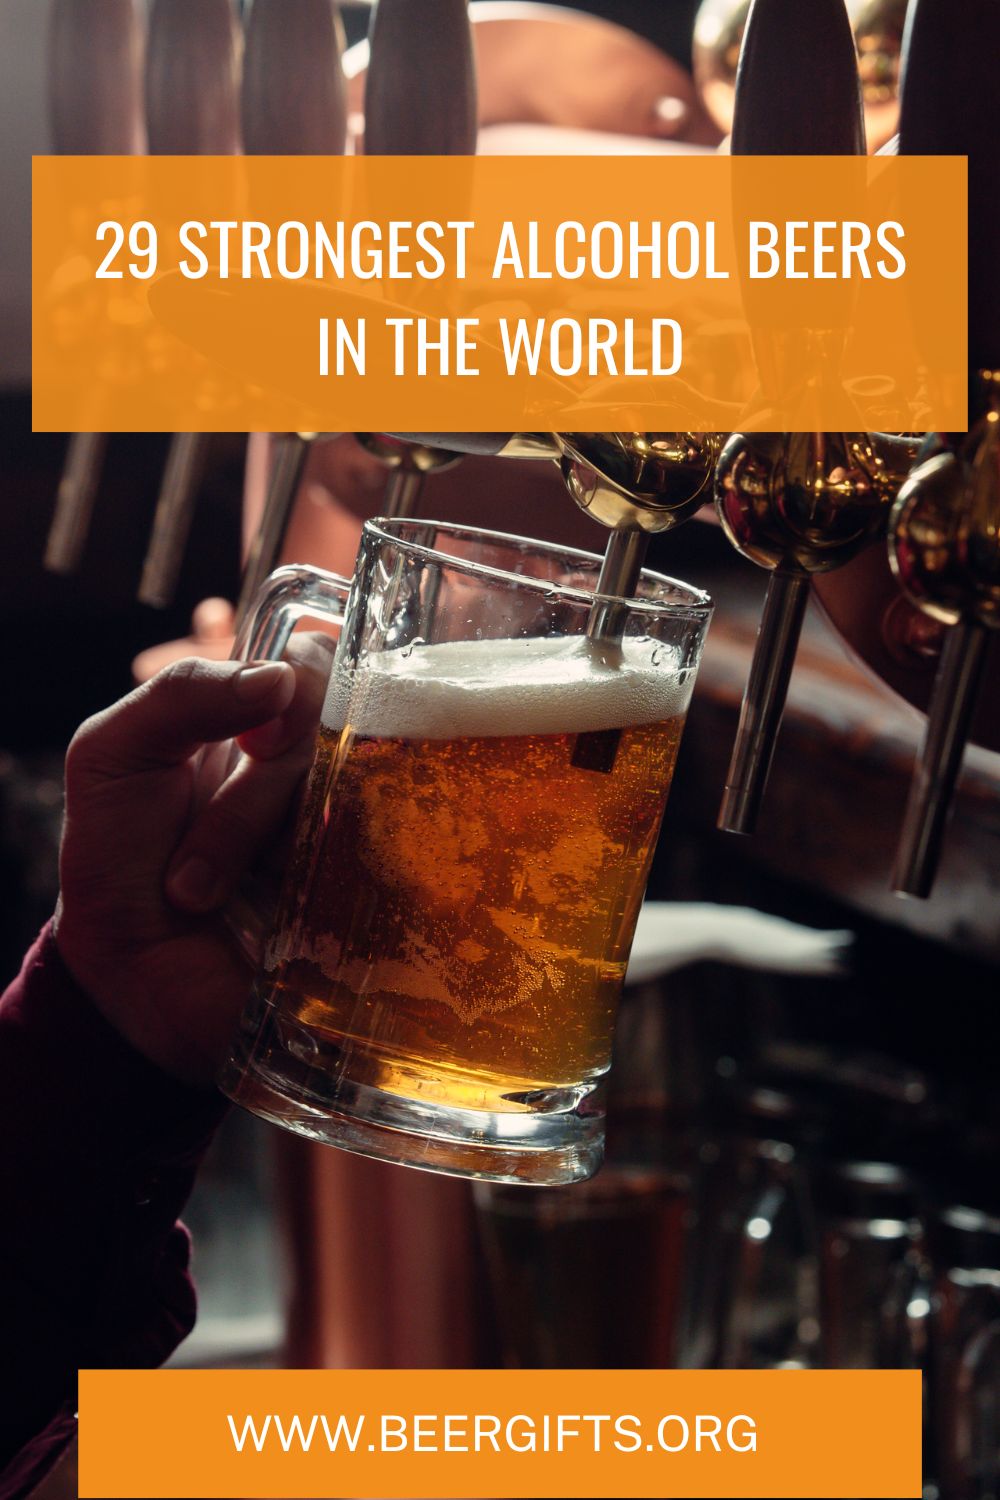 29 Strongest Alcohol Beers In the World1